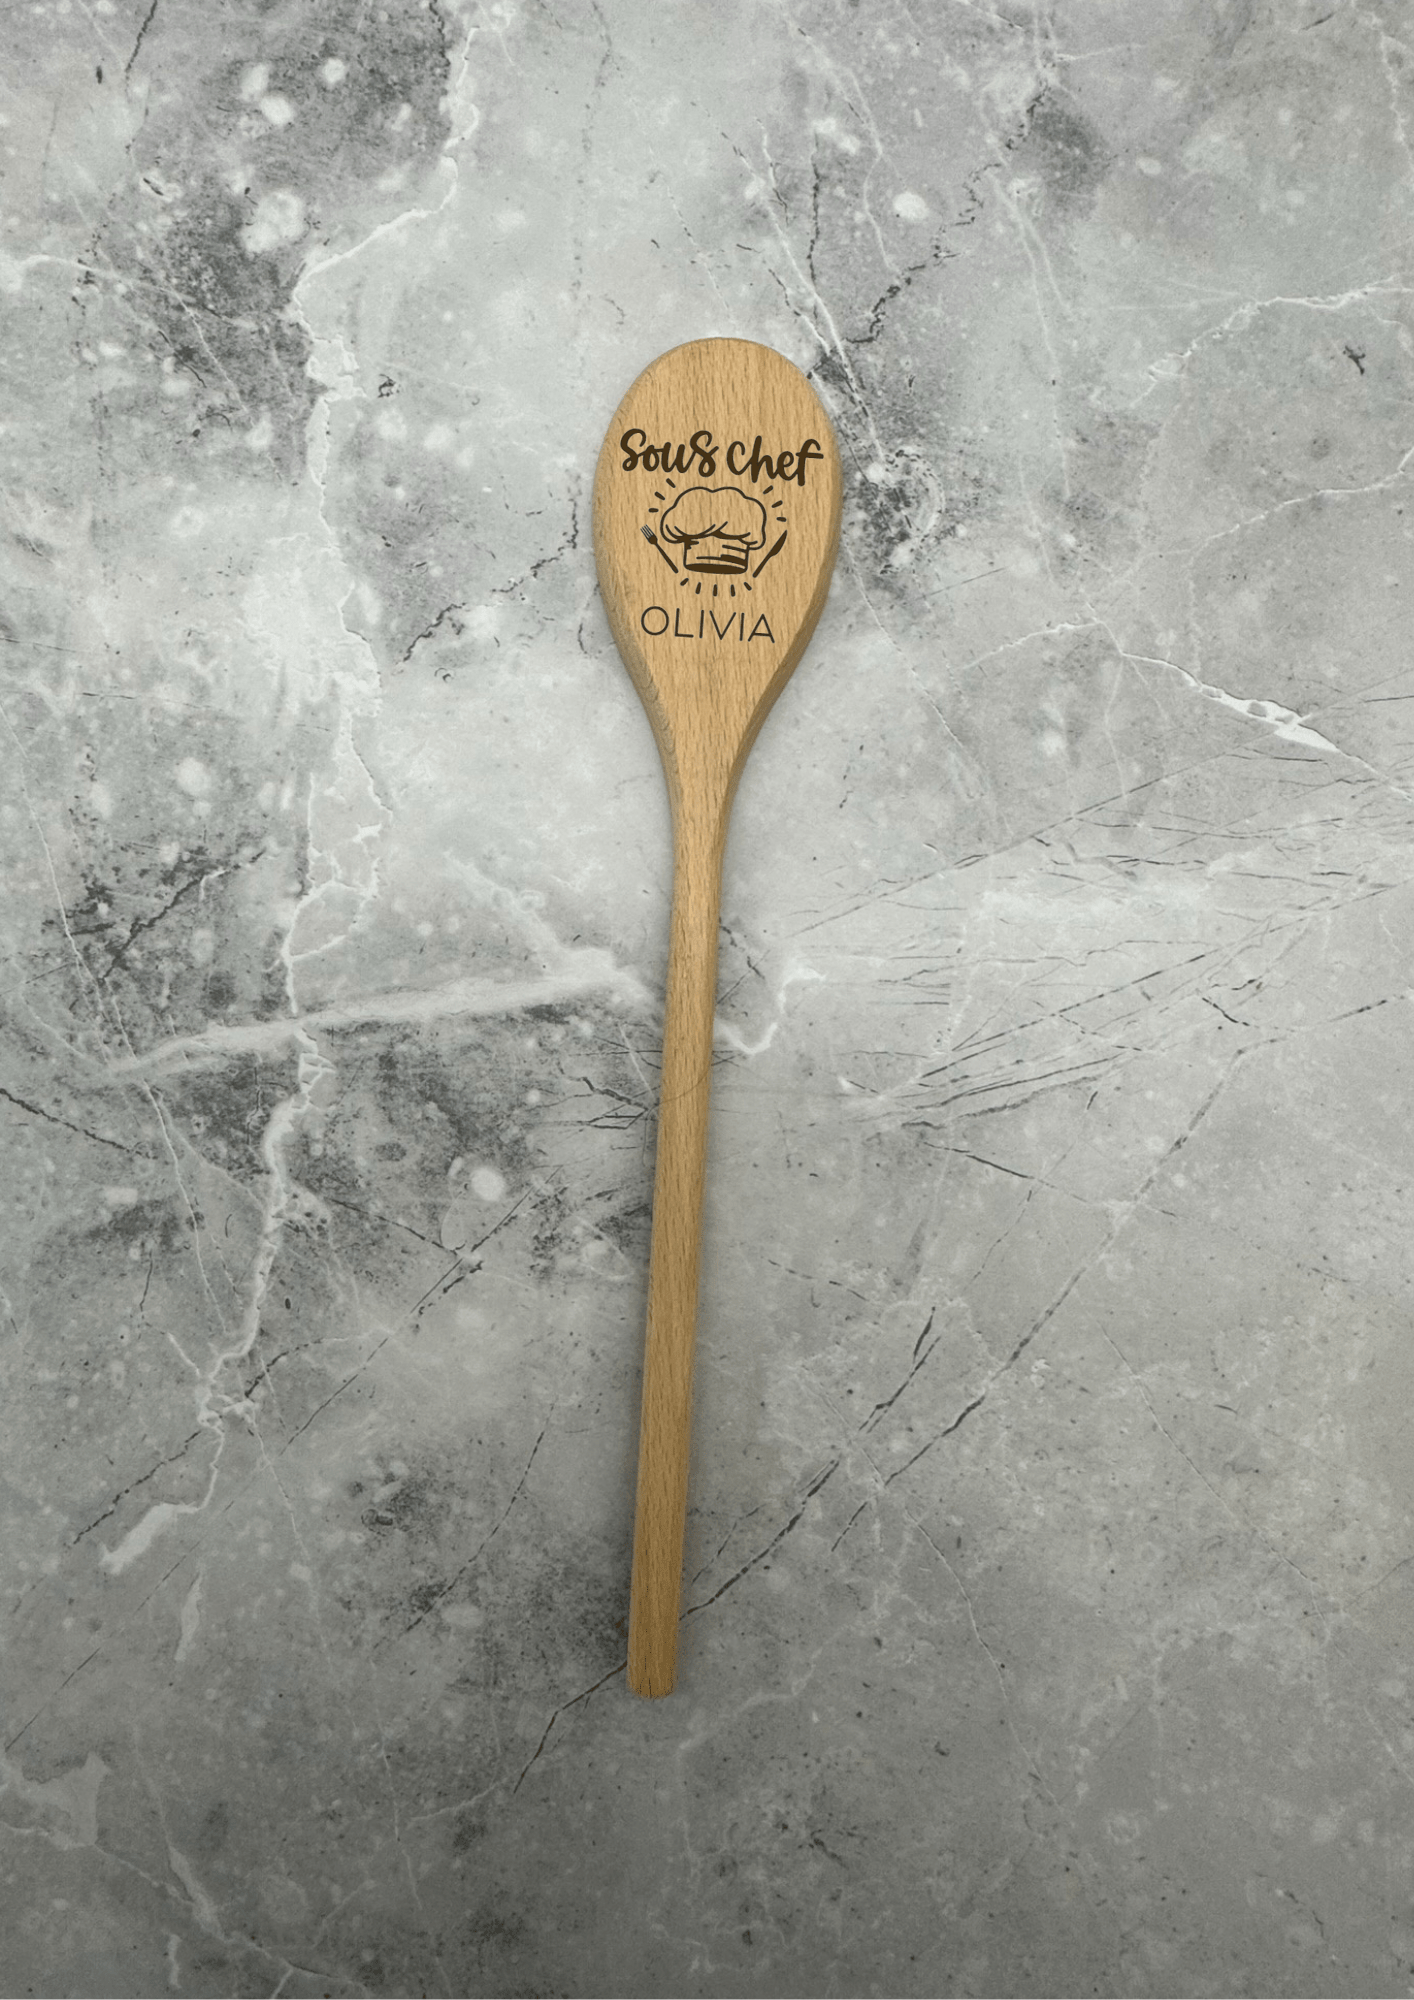 Lua Nova Wooden Spoon Personalised Wooden Spoon - Chef or Sous Chef